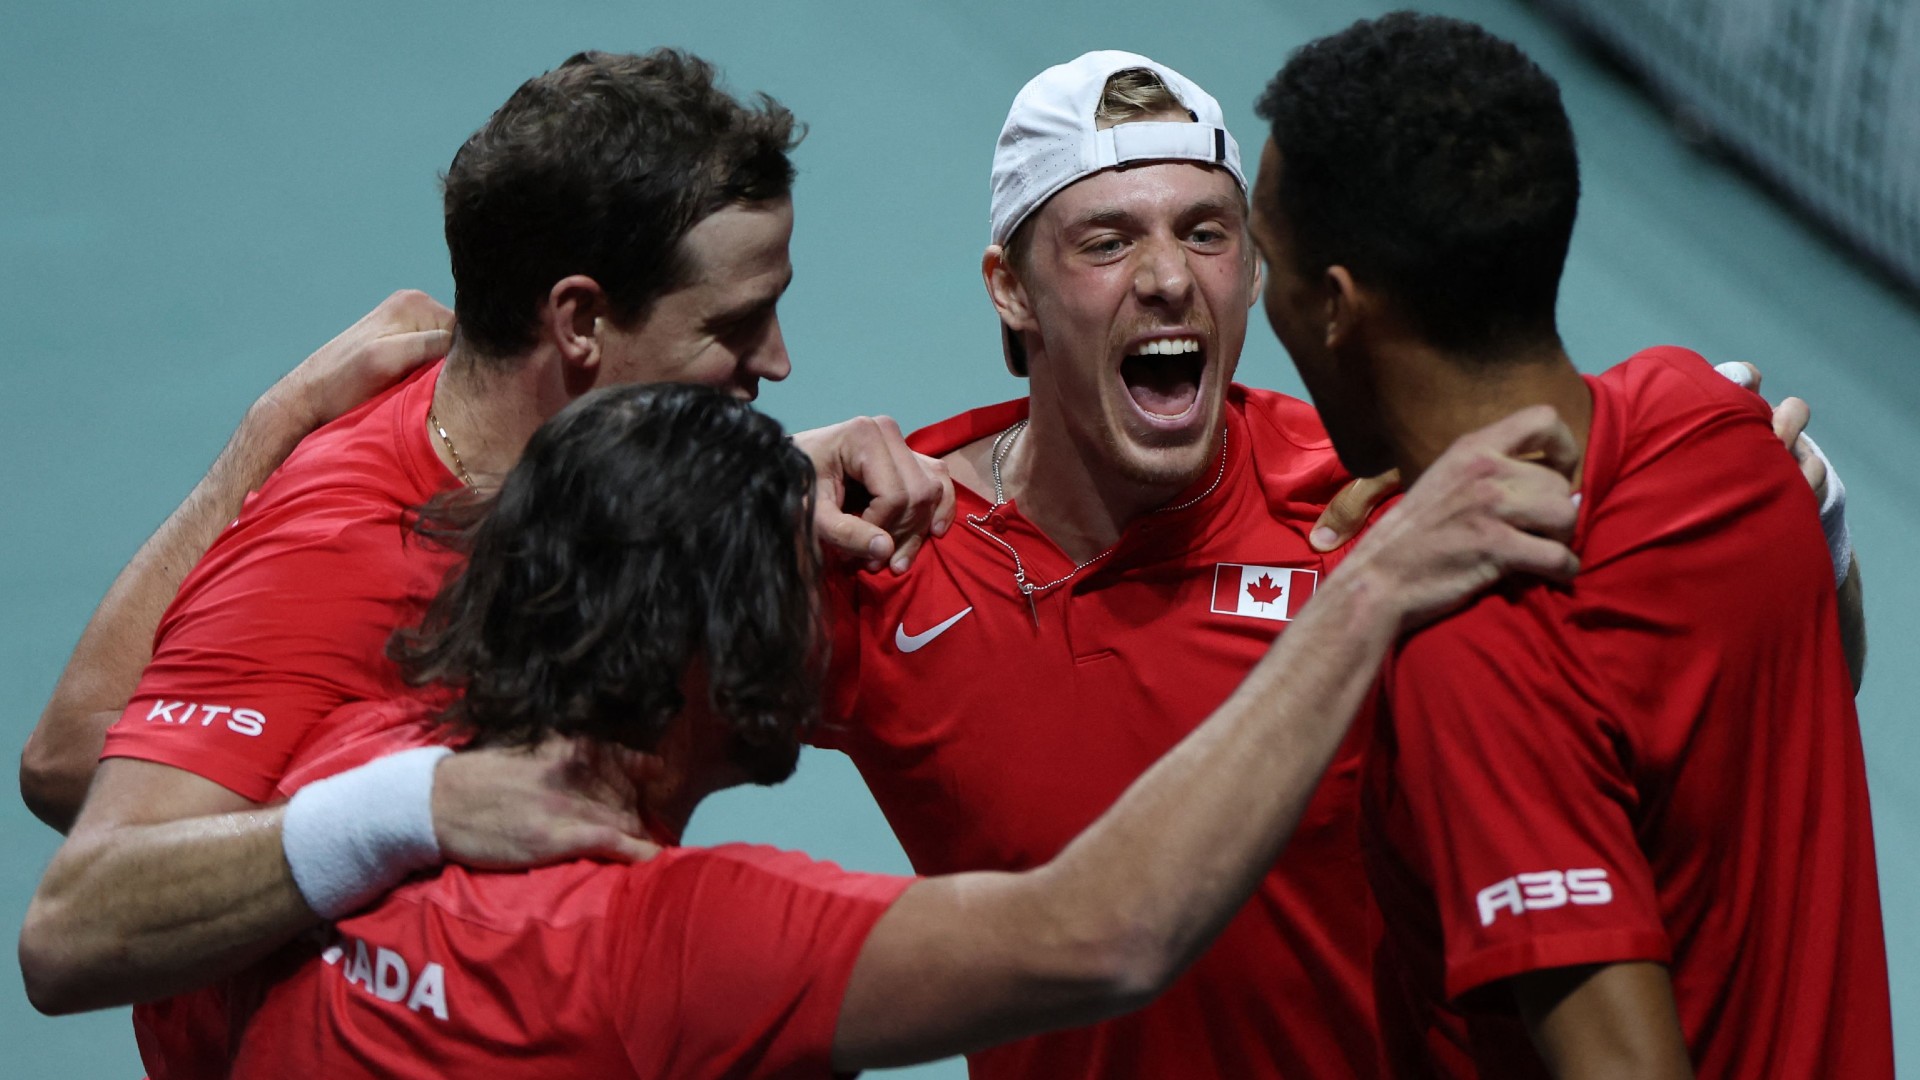 Canada comeback stuns Germany in Davis Cup beIN SPORTS